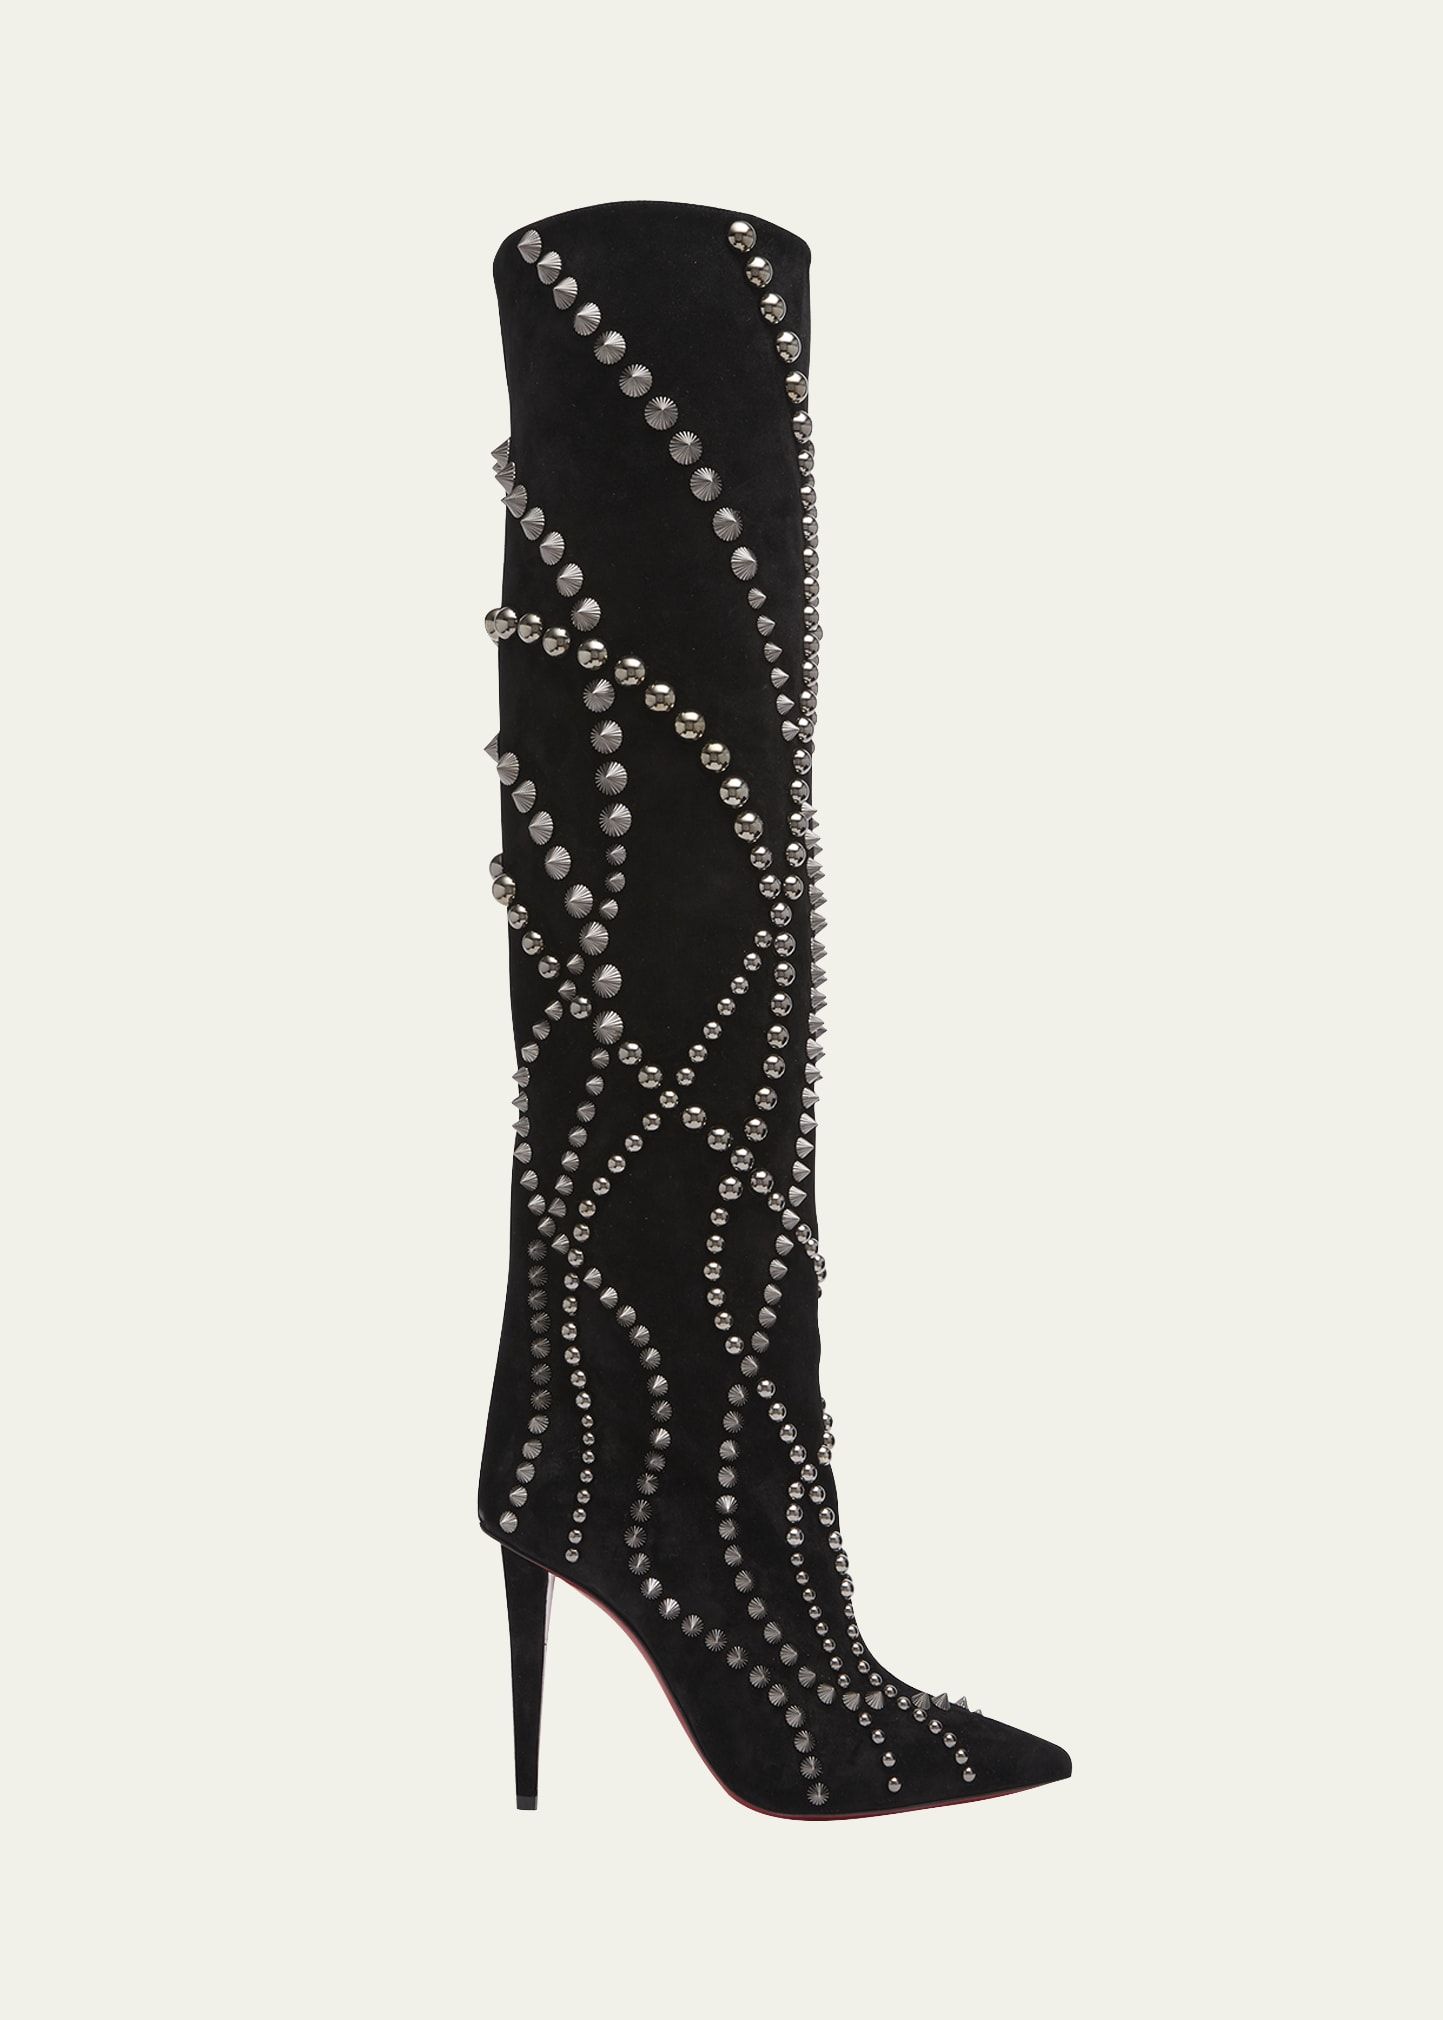 Christian Louboutin Astrilarge Botta Pika Red Sole Studded Suede Knee-High Boots | Bergdorf Goodman